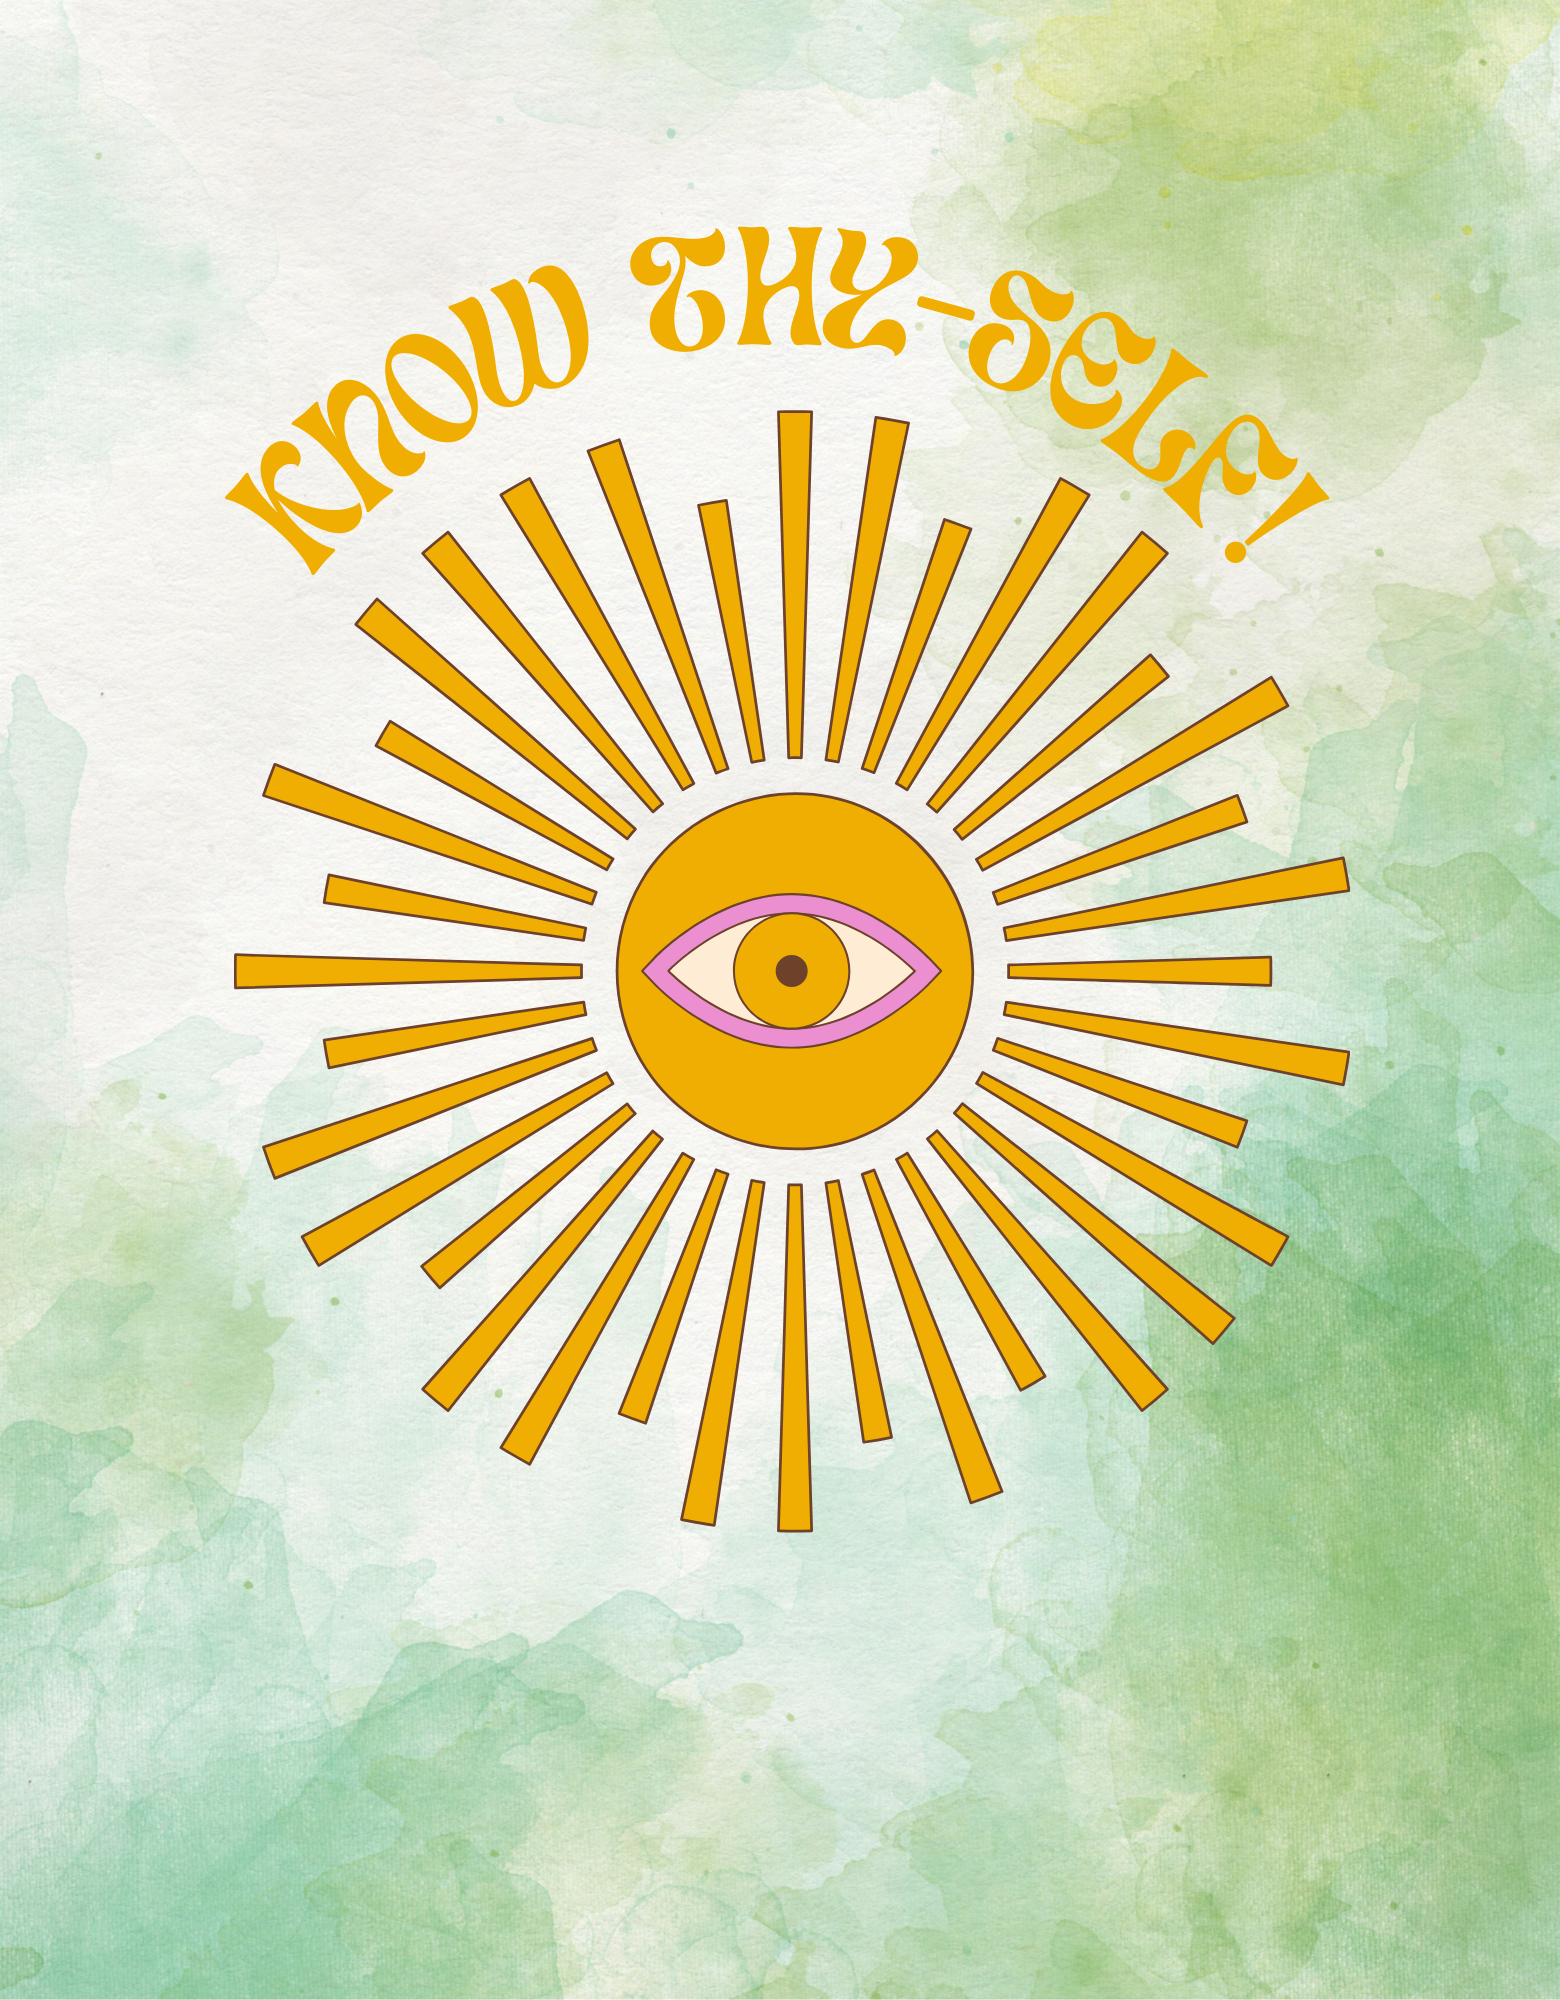 Decorative image with the statement, "Know Thy-Self!"